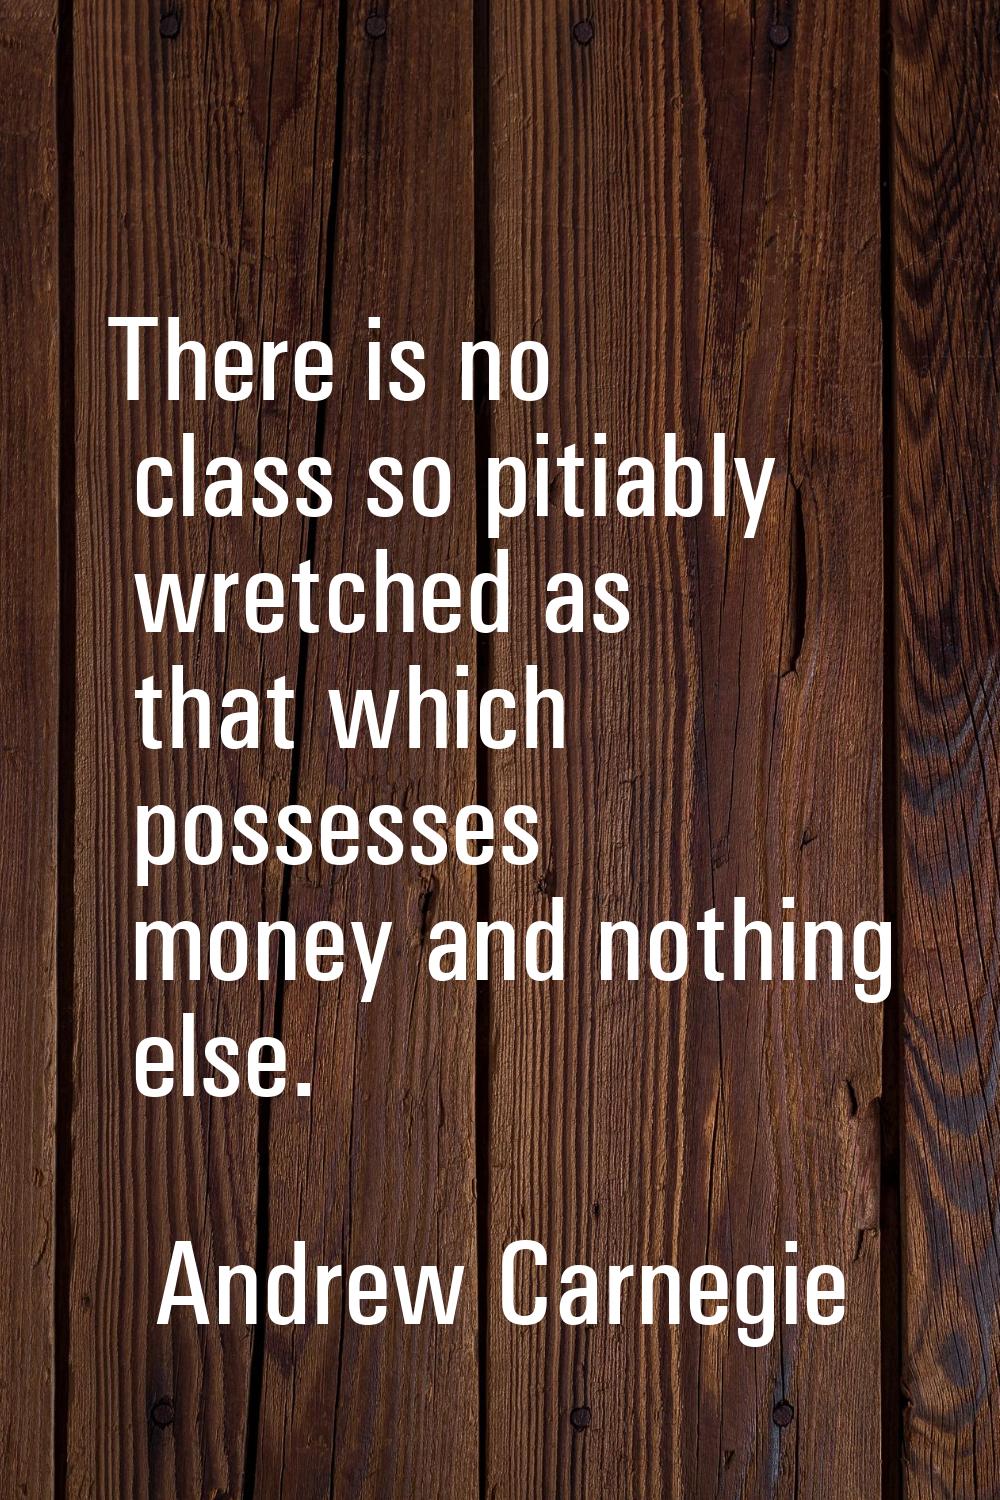 There is no class so pitiably wretched as that which possesses money and nothing else.